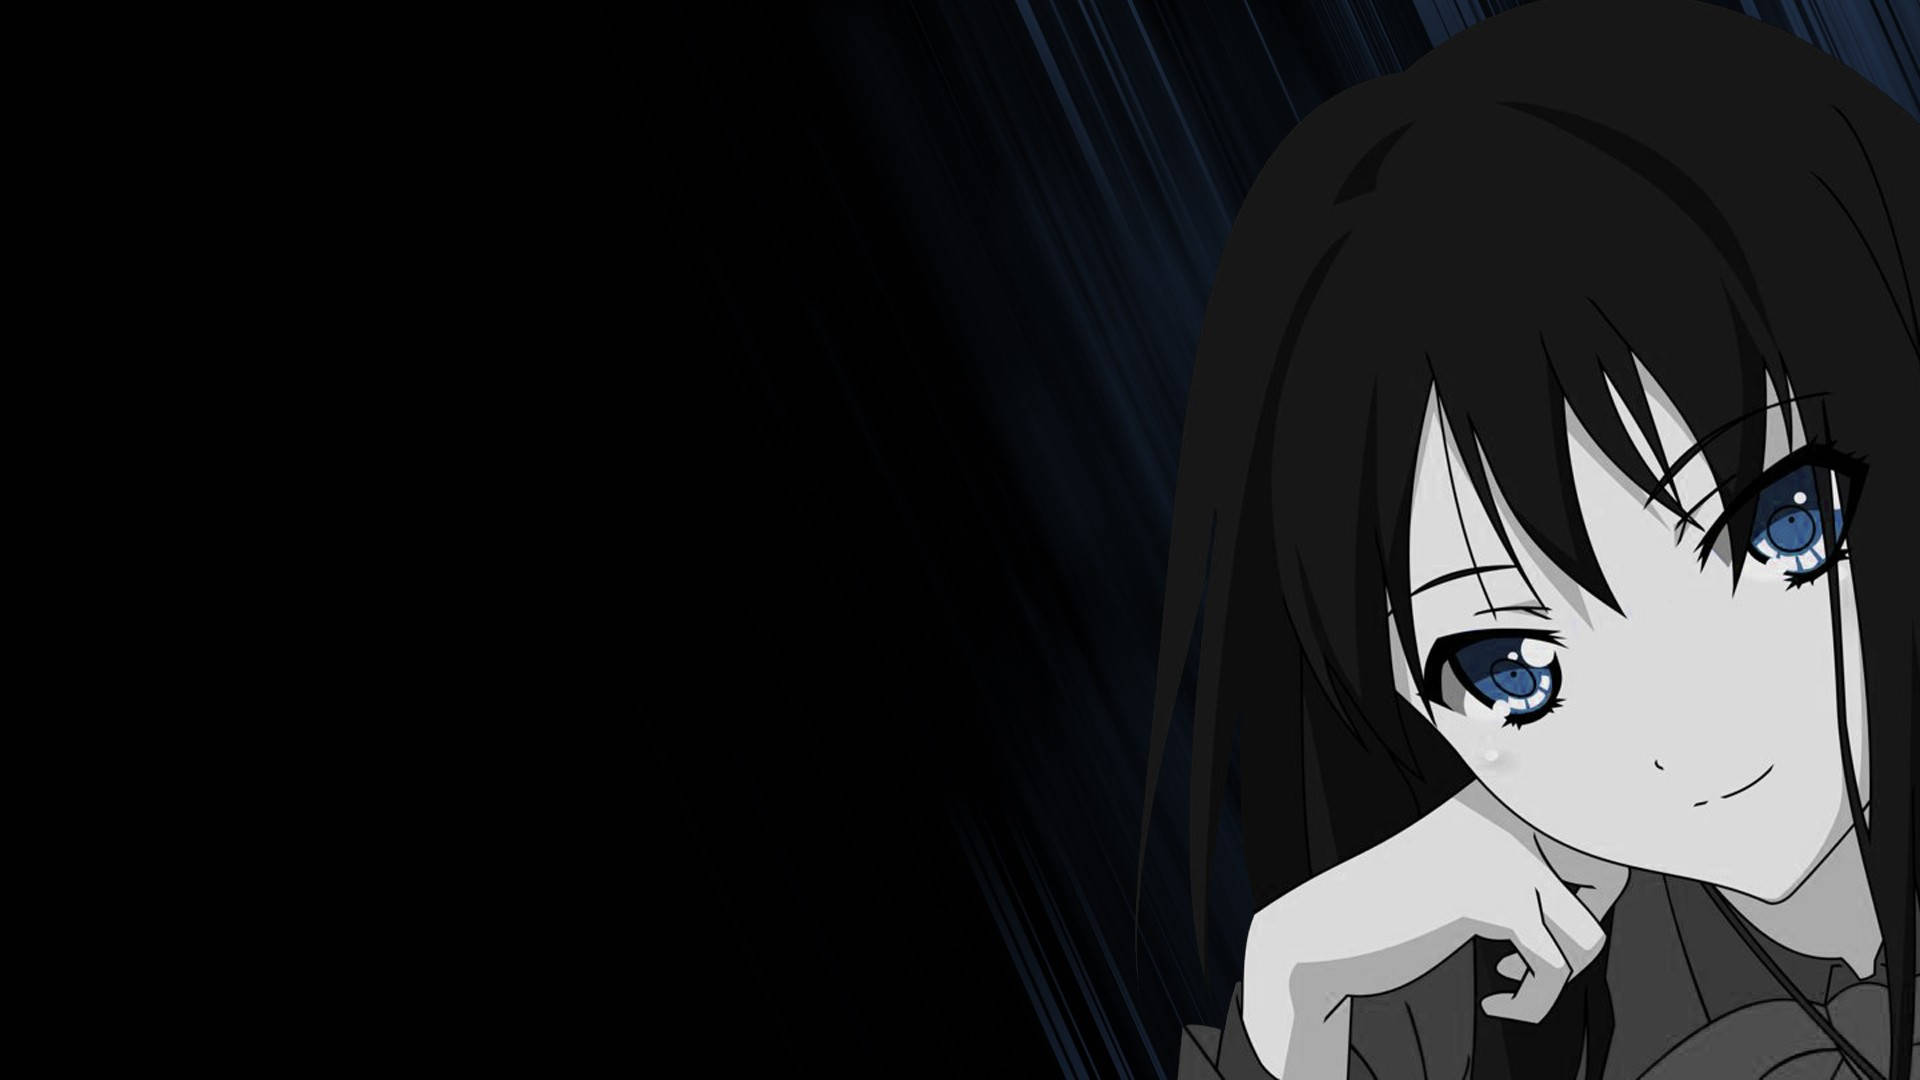 A Girl With Long Black Hair And Blue Eyes Wallpaper